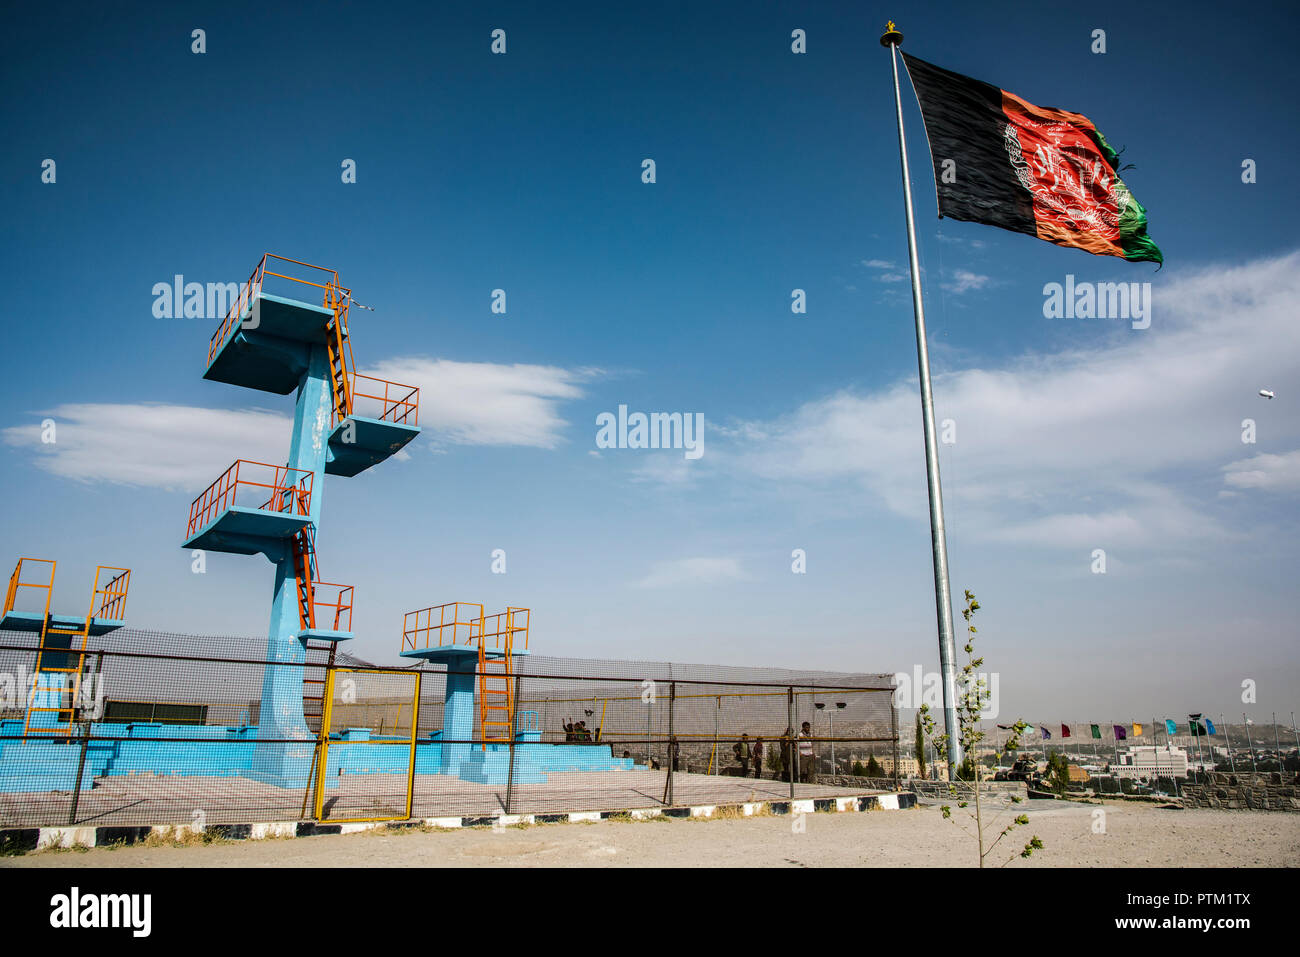 A huge flag of Afghanistan flies at the top of swimming pool hill overlooking Kabul in Afghanistan. Stock Photo